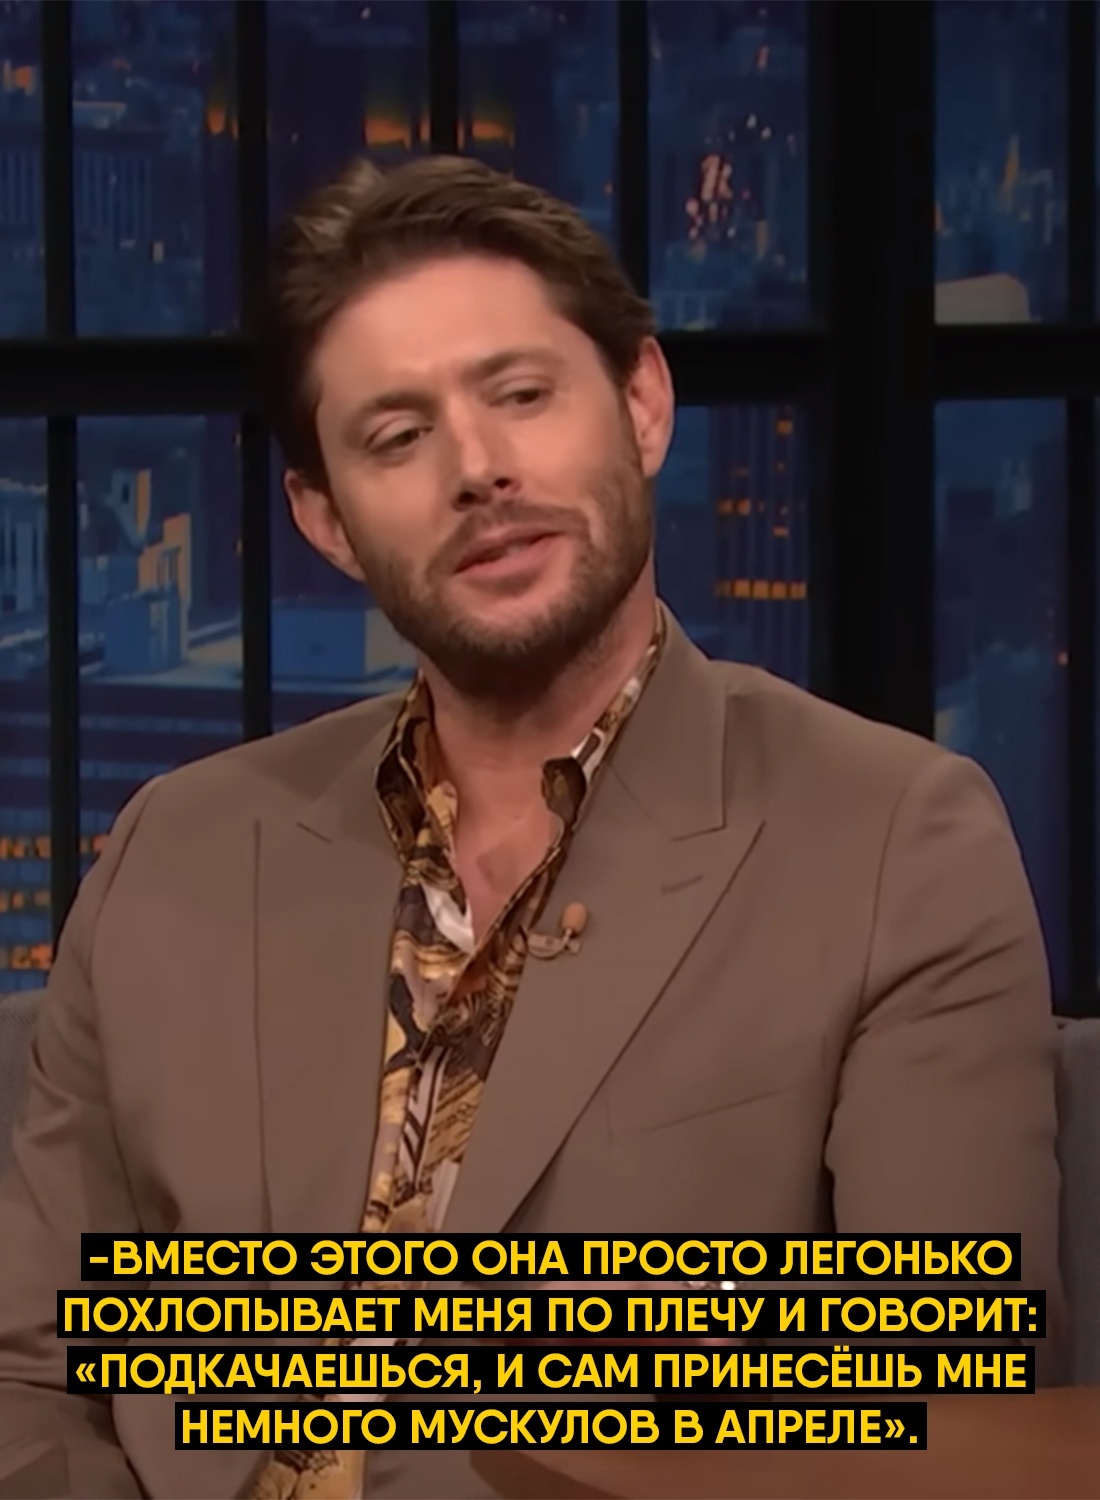 Jensen Ackles and good preparation for filming The Boys - Jensen Ackles, Actors and actresses, Celebrities, Interview, Boys (TV series), Roles, Training, Workout, From the network, Humor, Longpost, Storyboard